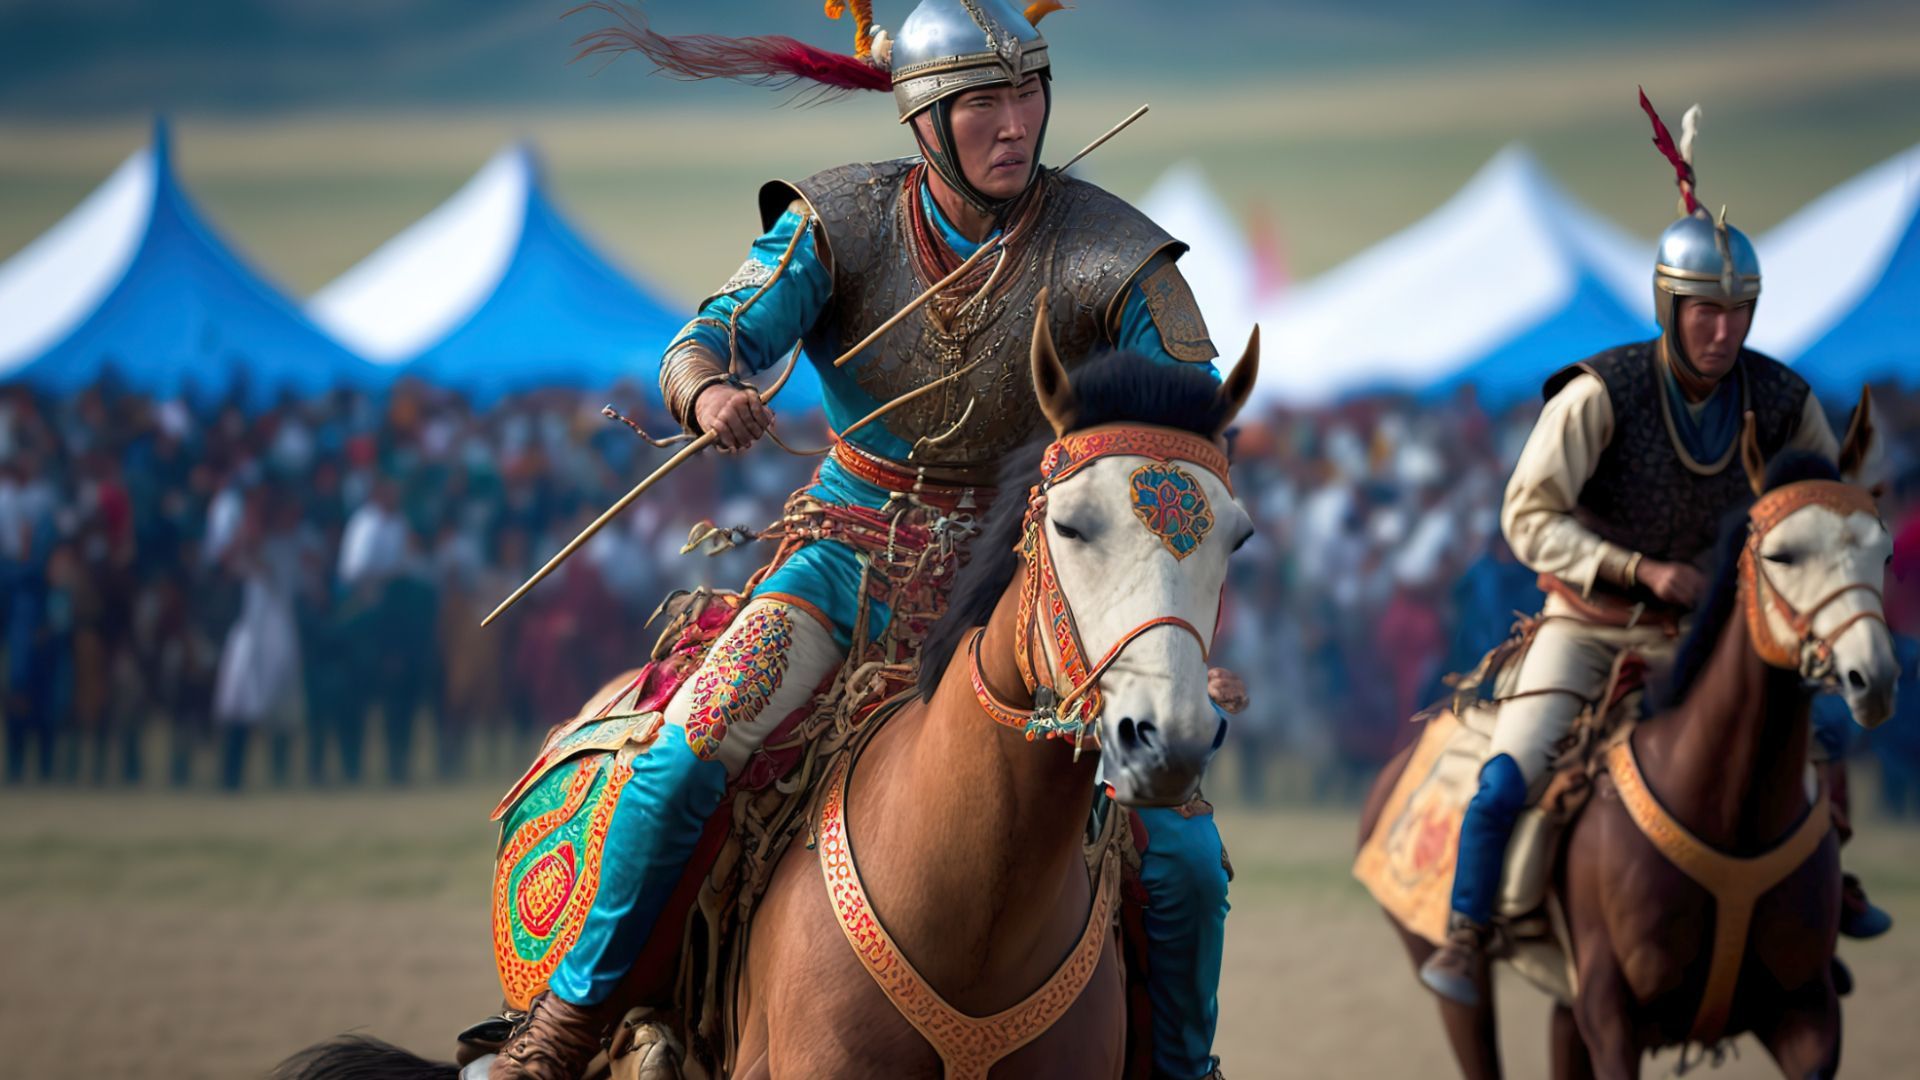 two men are riding horses in front of a crowd at Naadam Manly Games in Mongolia